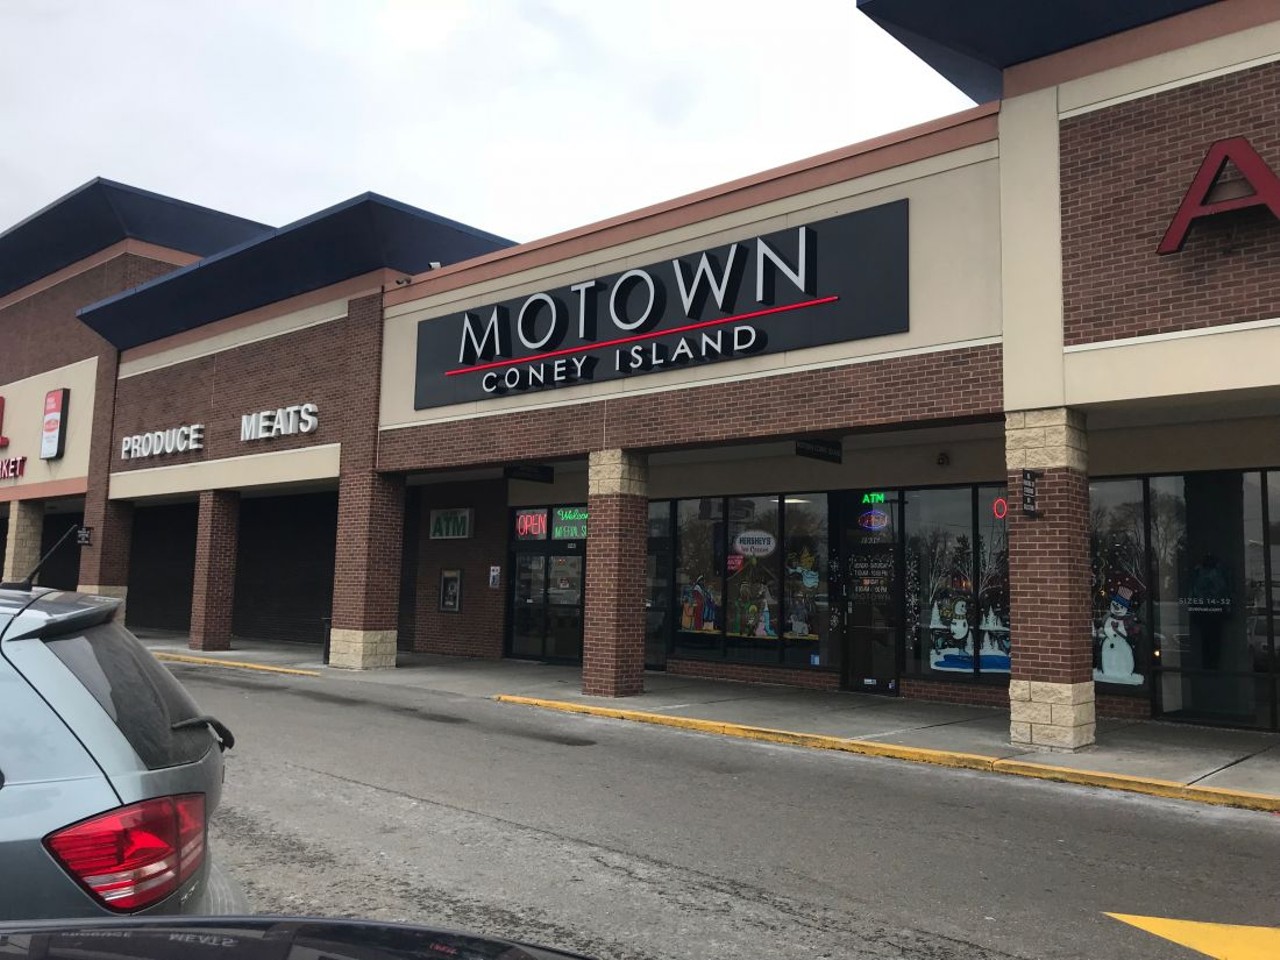 10. Motown Coney Island
1940 E. Eight Mile Rd., Detroit
Best strip mall coney. Tucked away in a shopping center at the intersection of 8 Mile Road and Dequindre Street, this is a must-try establishment in a central location with a collection of positive reviews.
Photo by Mike Dionne